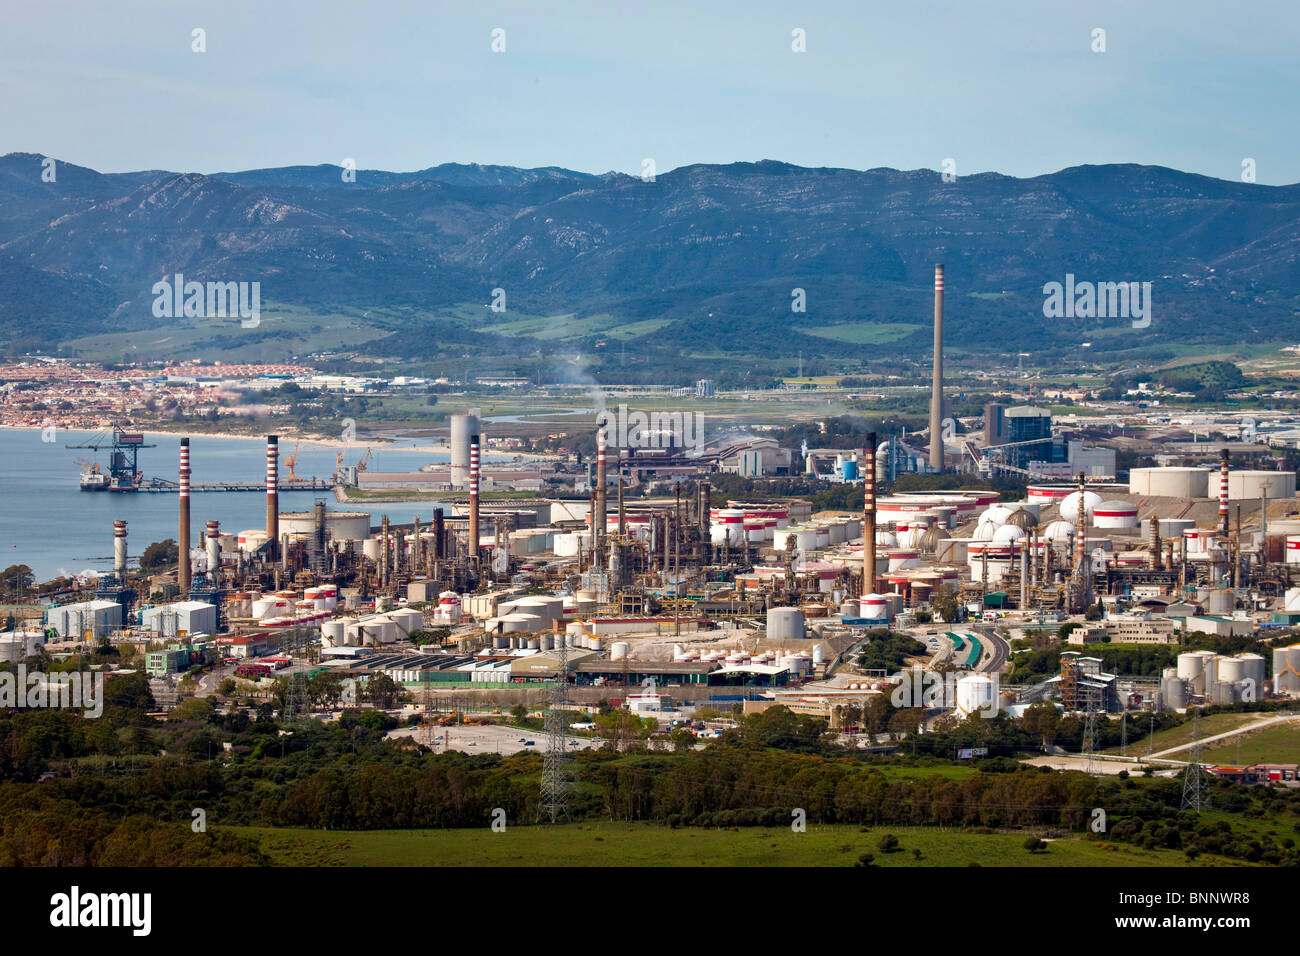 Andalusia Spain industry Algeciras refinery oil energy Stock Photo